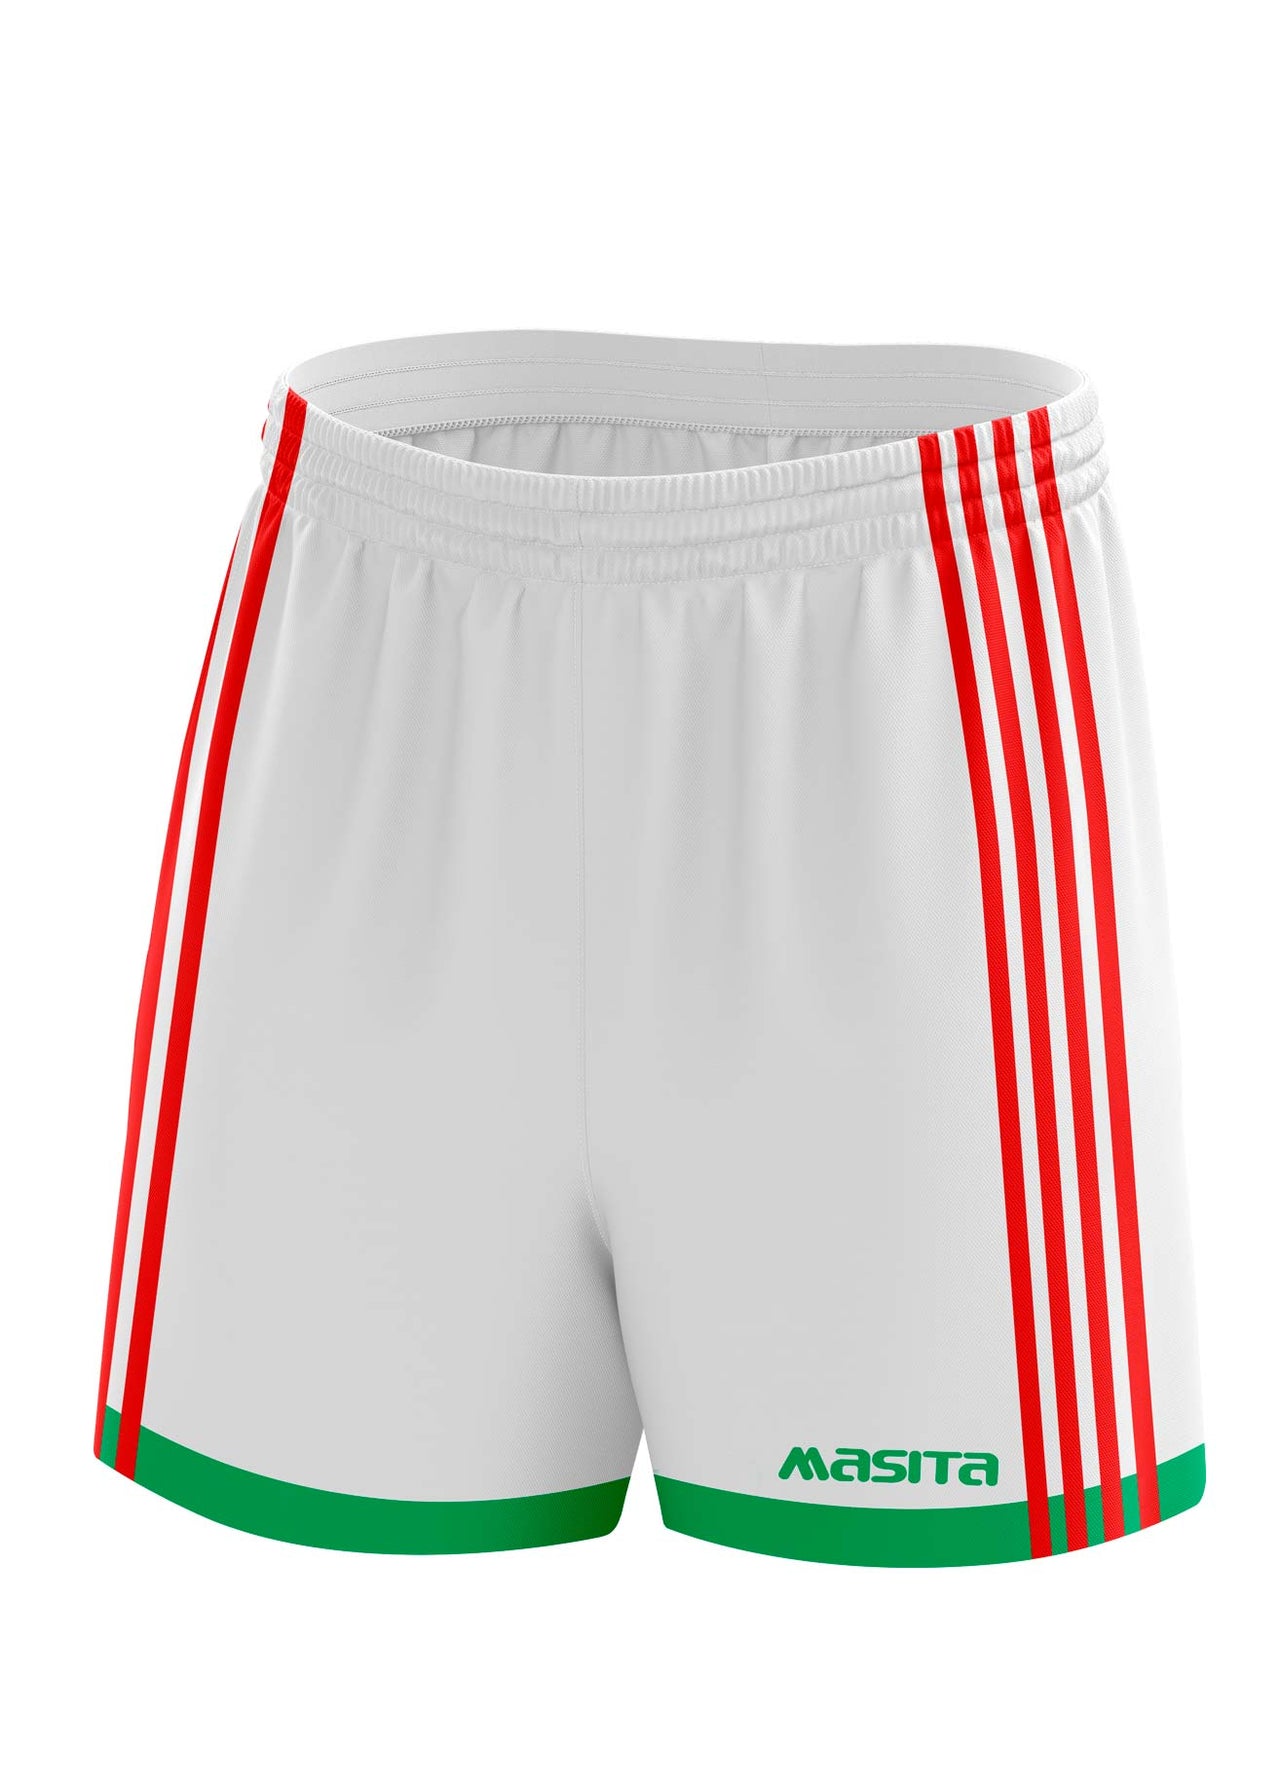 Solo Gaelic Shorts White/Green/Red Adult